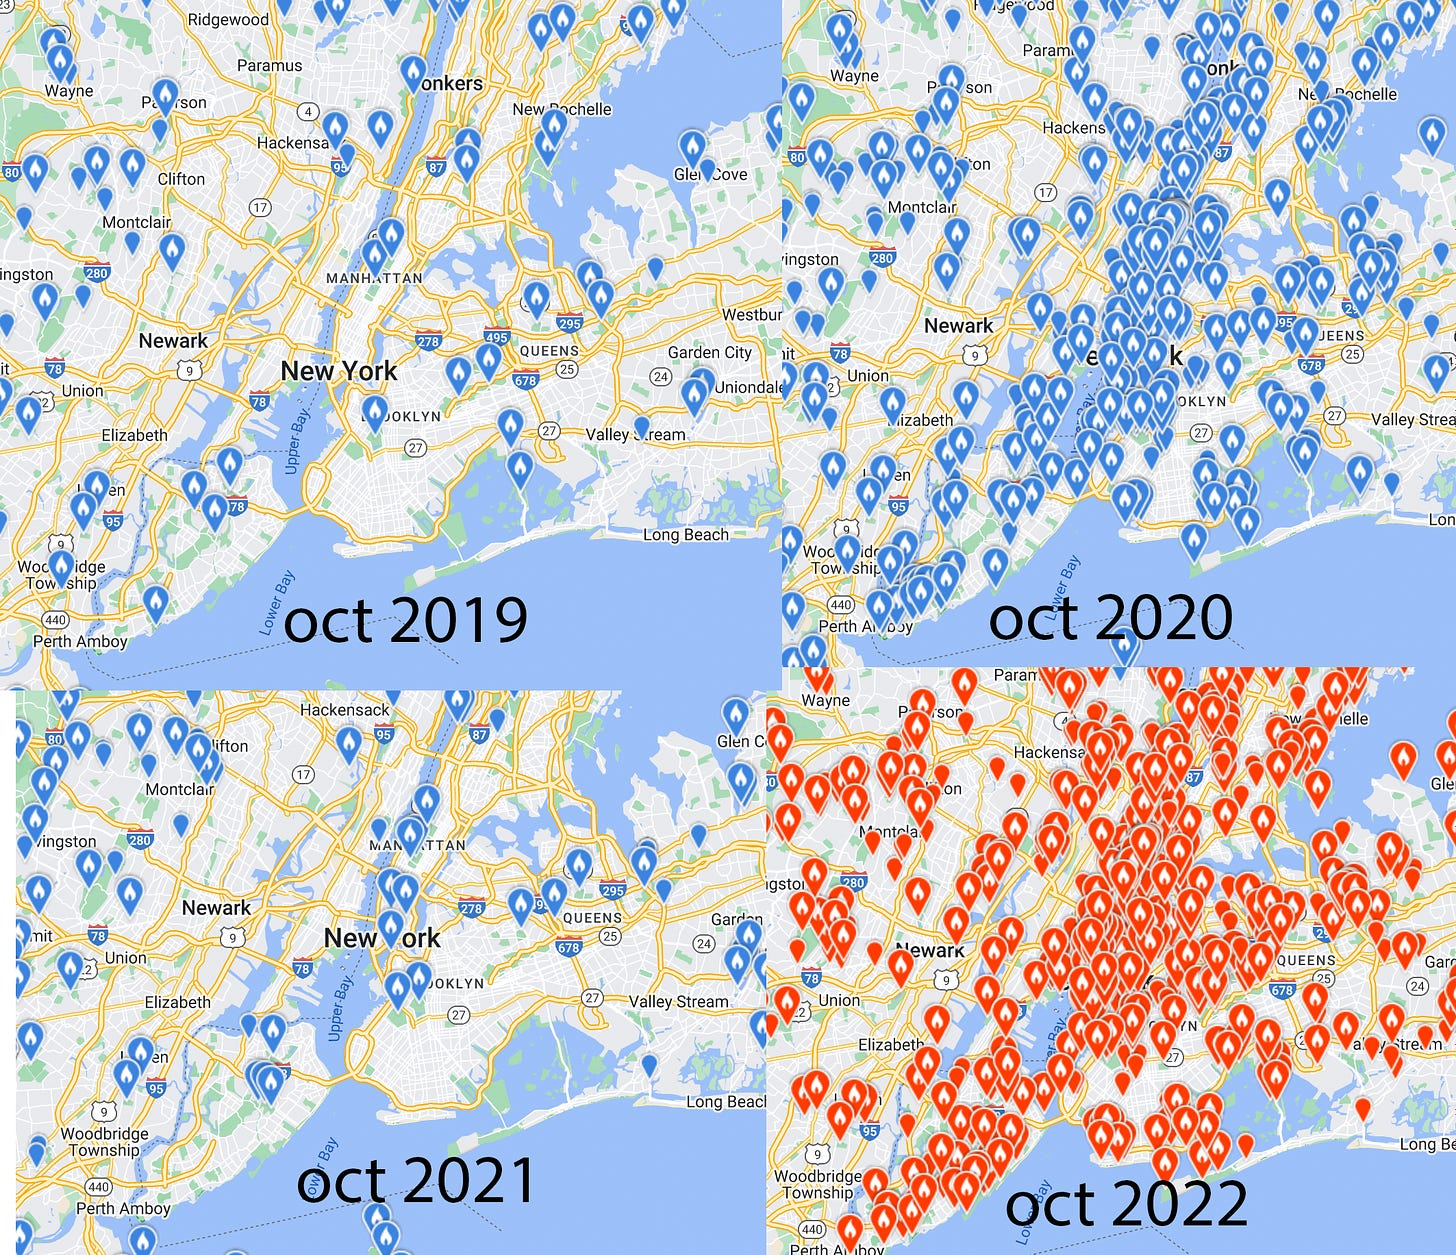 four screenshots of nyc maps with blue location markers on them. each marker represents the presence of a tufted titmouse at a location. the four maps are labeled "oct 2019, oct 2020, oct 2021, oct 2022" respectively. the oct 2019 and oct 2021 maps show few blue markers in the nyc limits. the oct 2020 and oct 2022 maps show many markers in the nyc limits. the markers on the 2022 map are in red, denoting many birds.